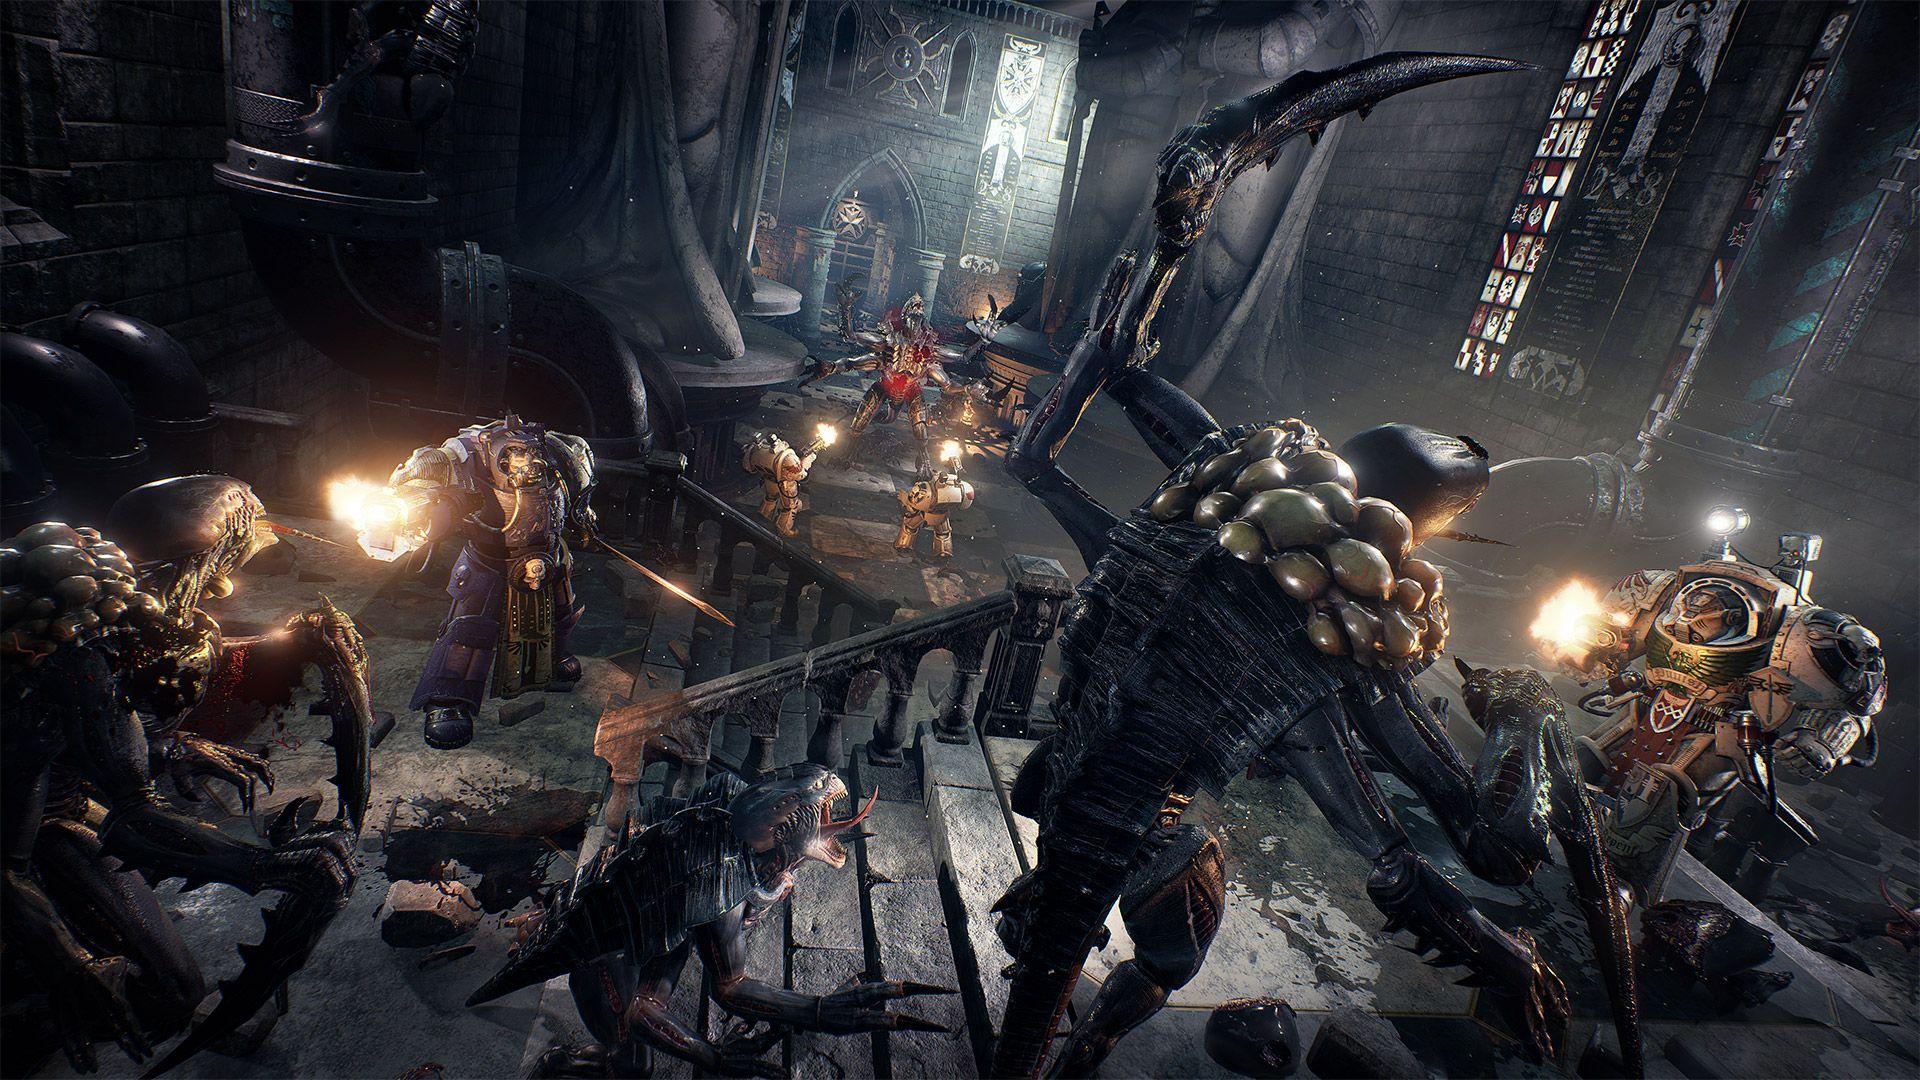 Space Hulk: Deathwing Performance and Crashes